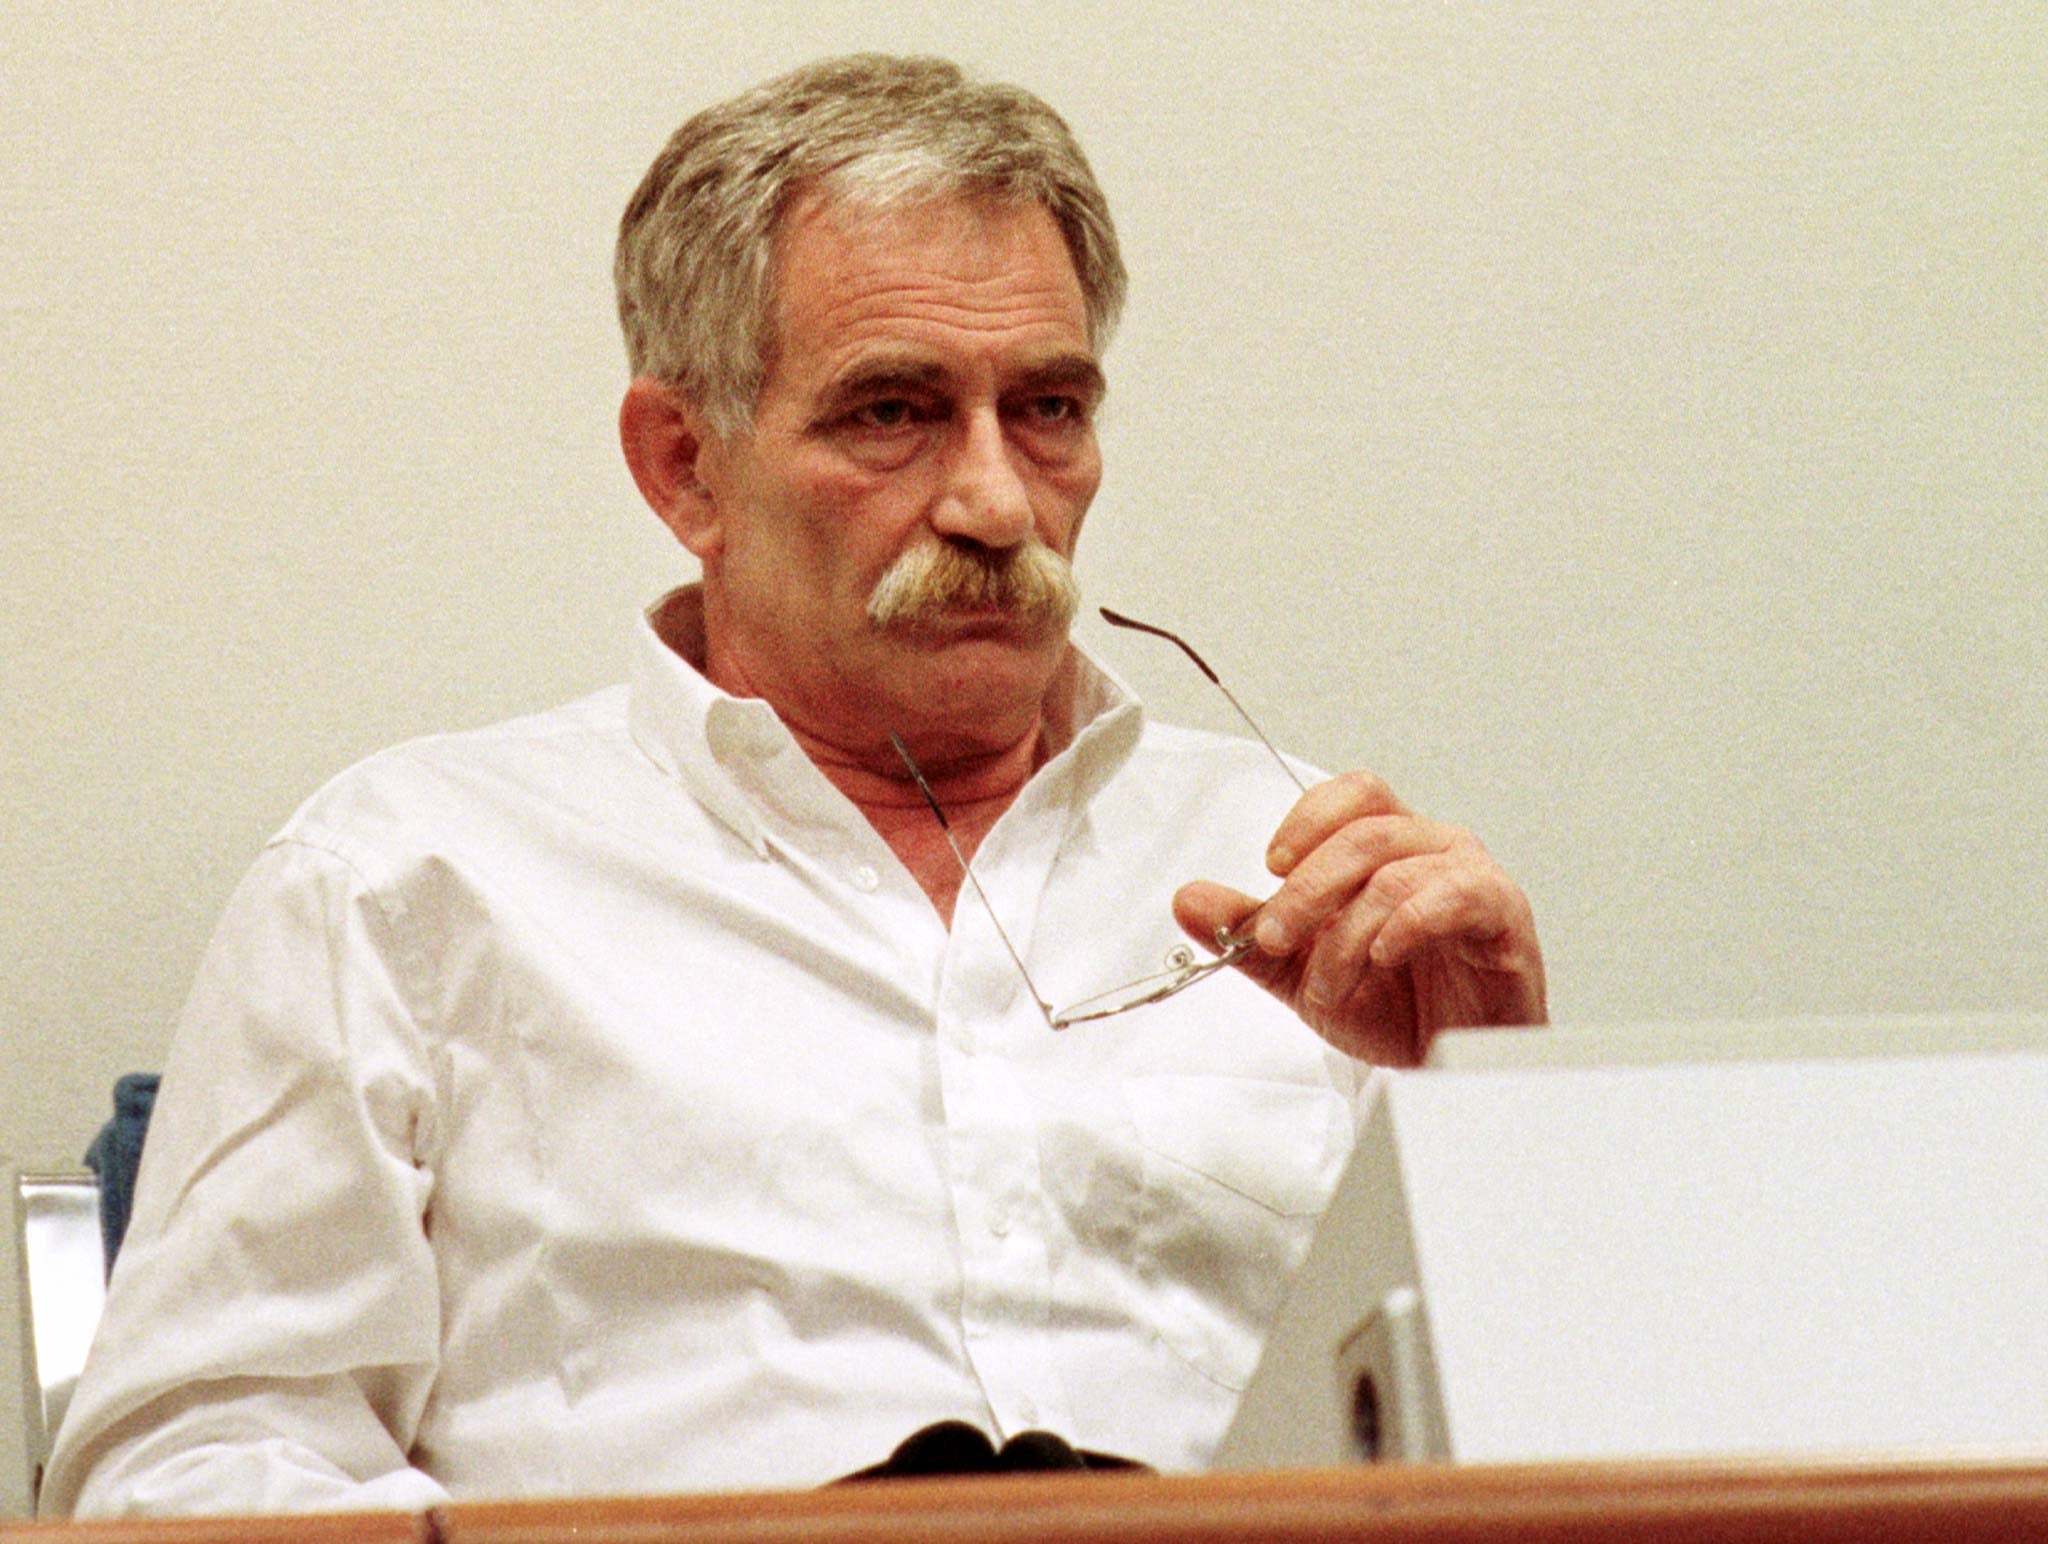 Kovacevic was indicted by The Hague for his role during the Bosnian War